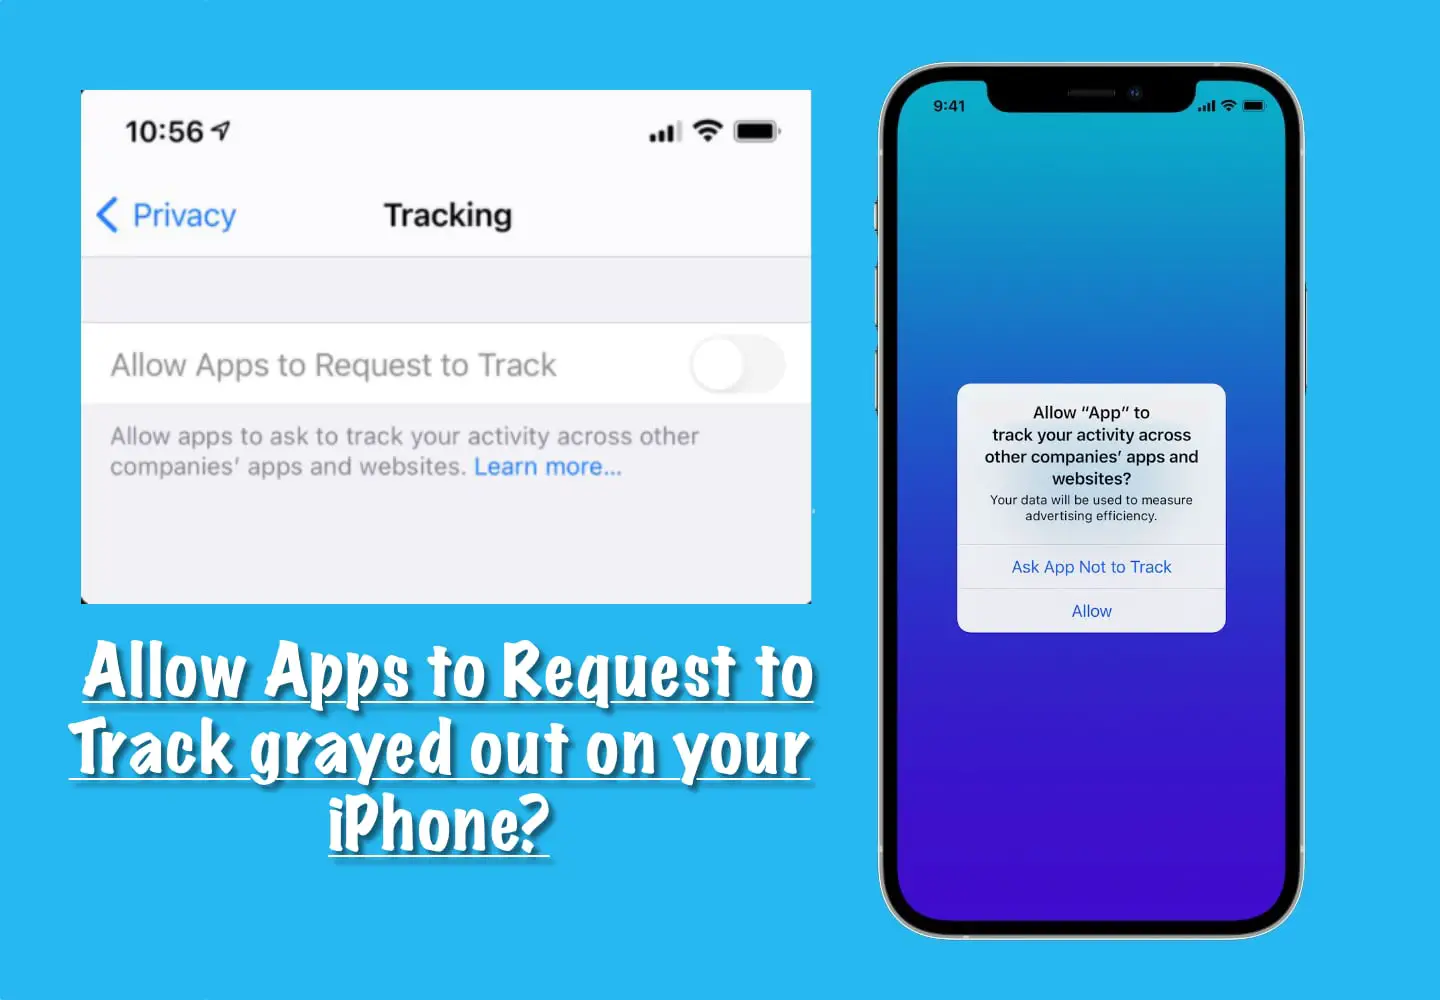 Allow Apps to Request to Track grayed out